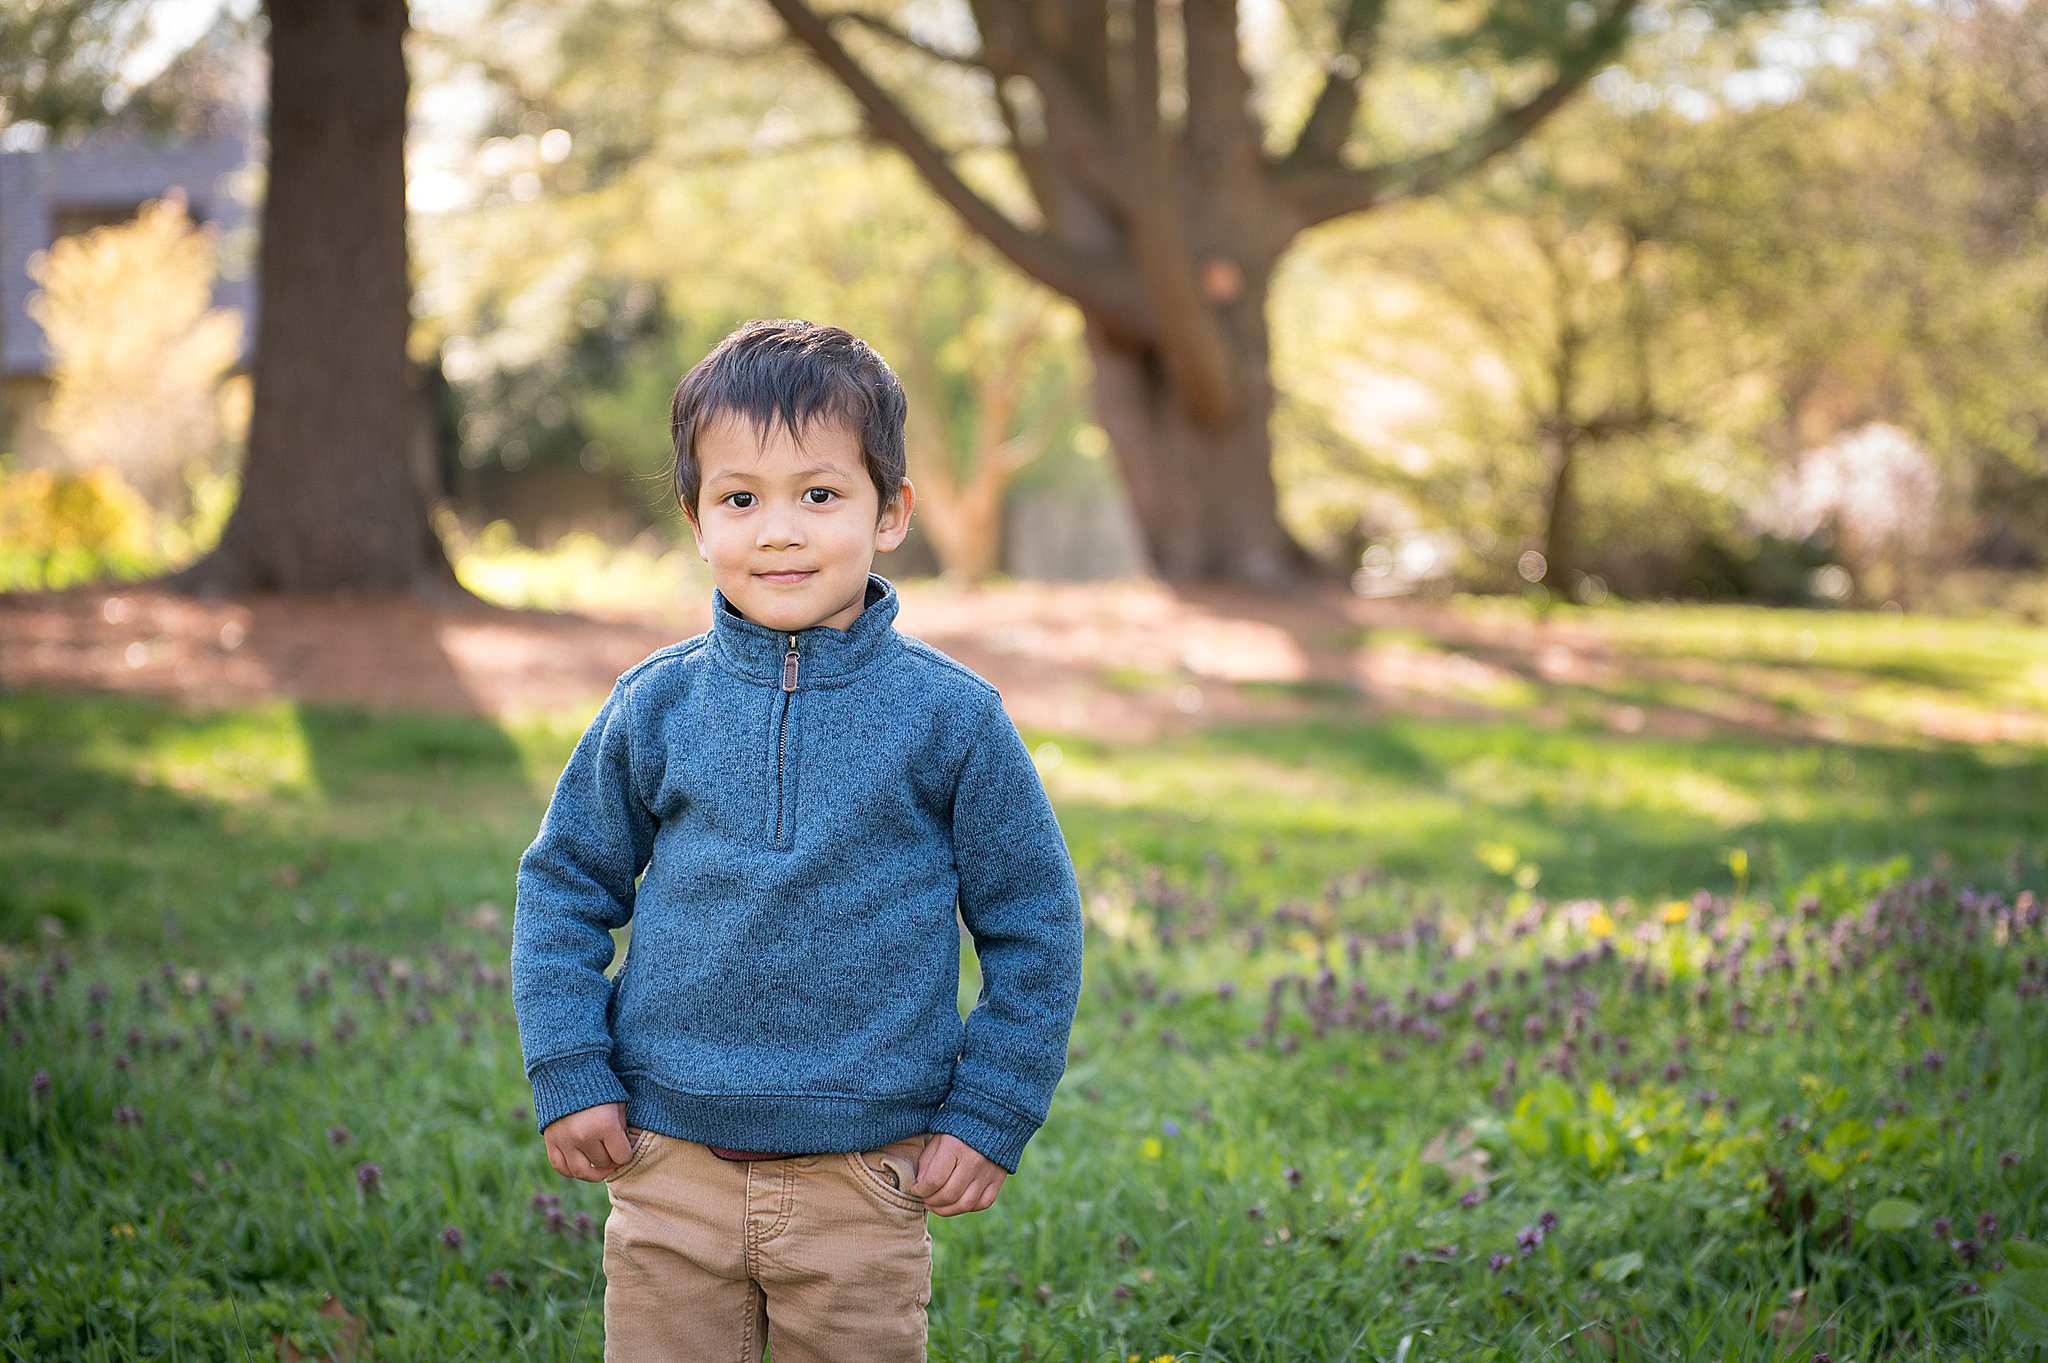 A young boy in a blue sweater stands in a park garden with hands in pockets